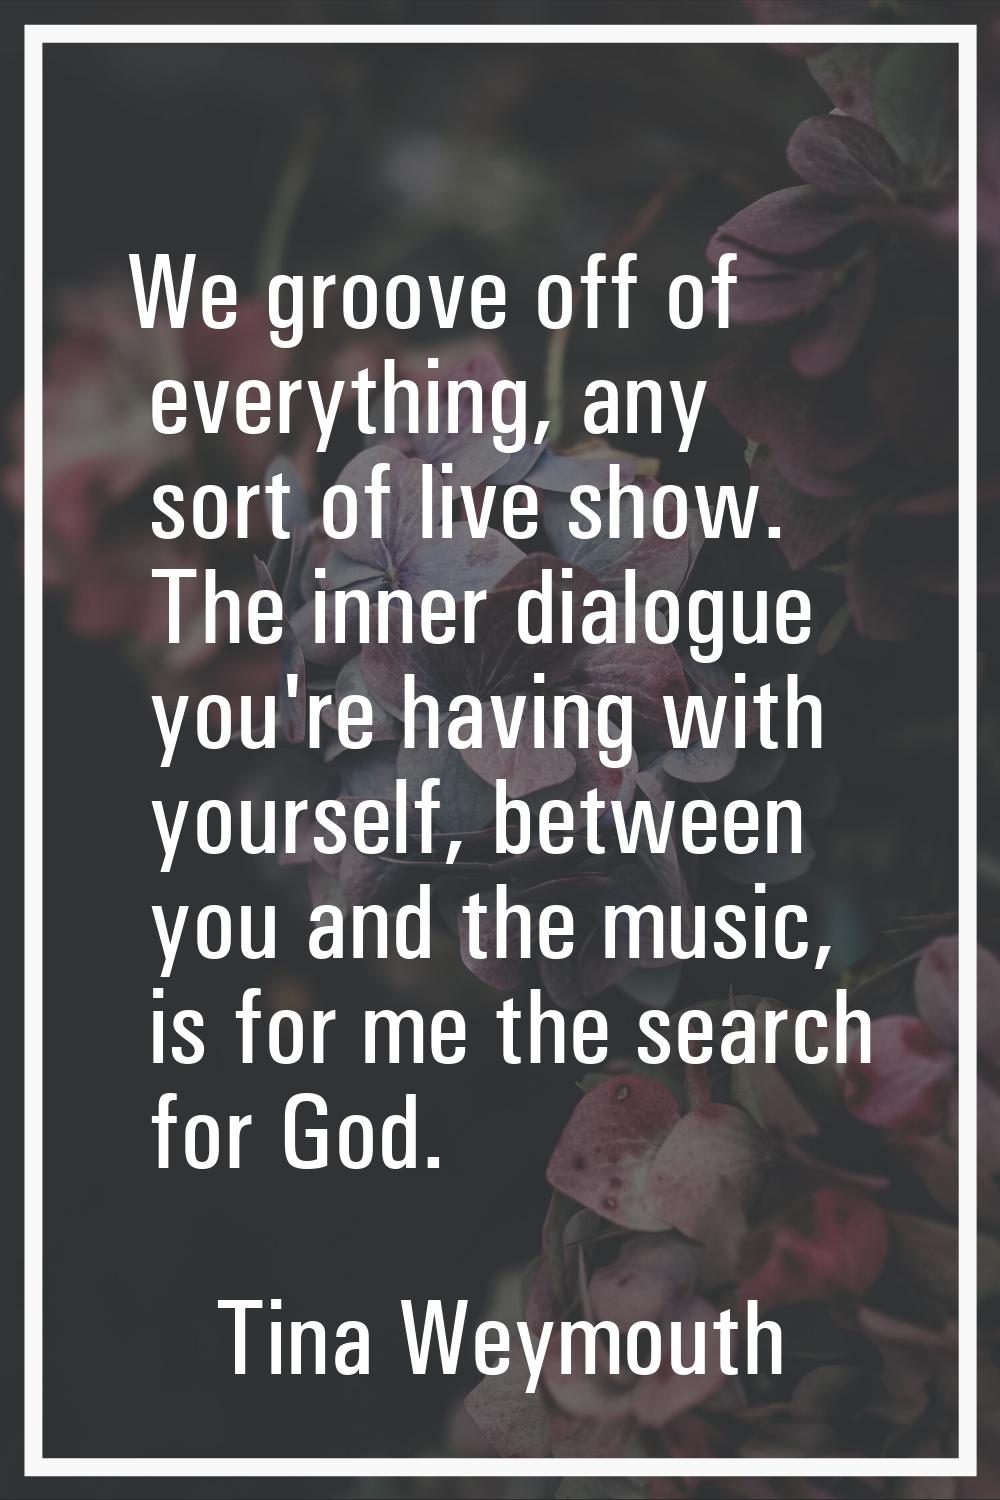 We groove off of everything, any sort of live show. The inner dialogue you're having with yourself,